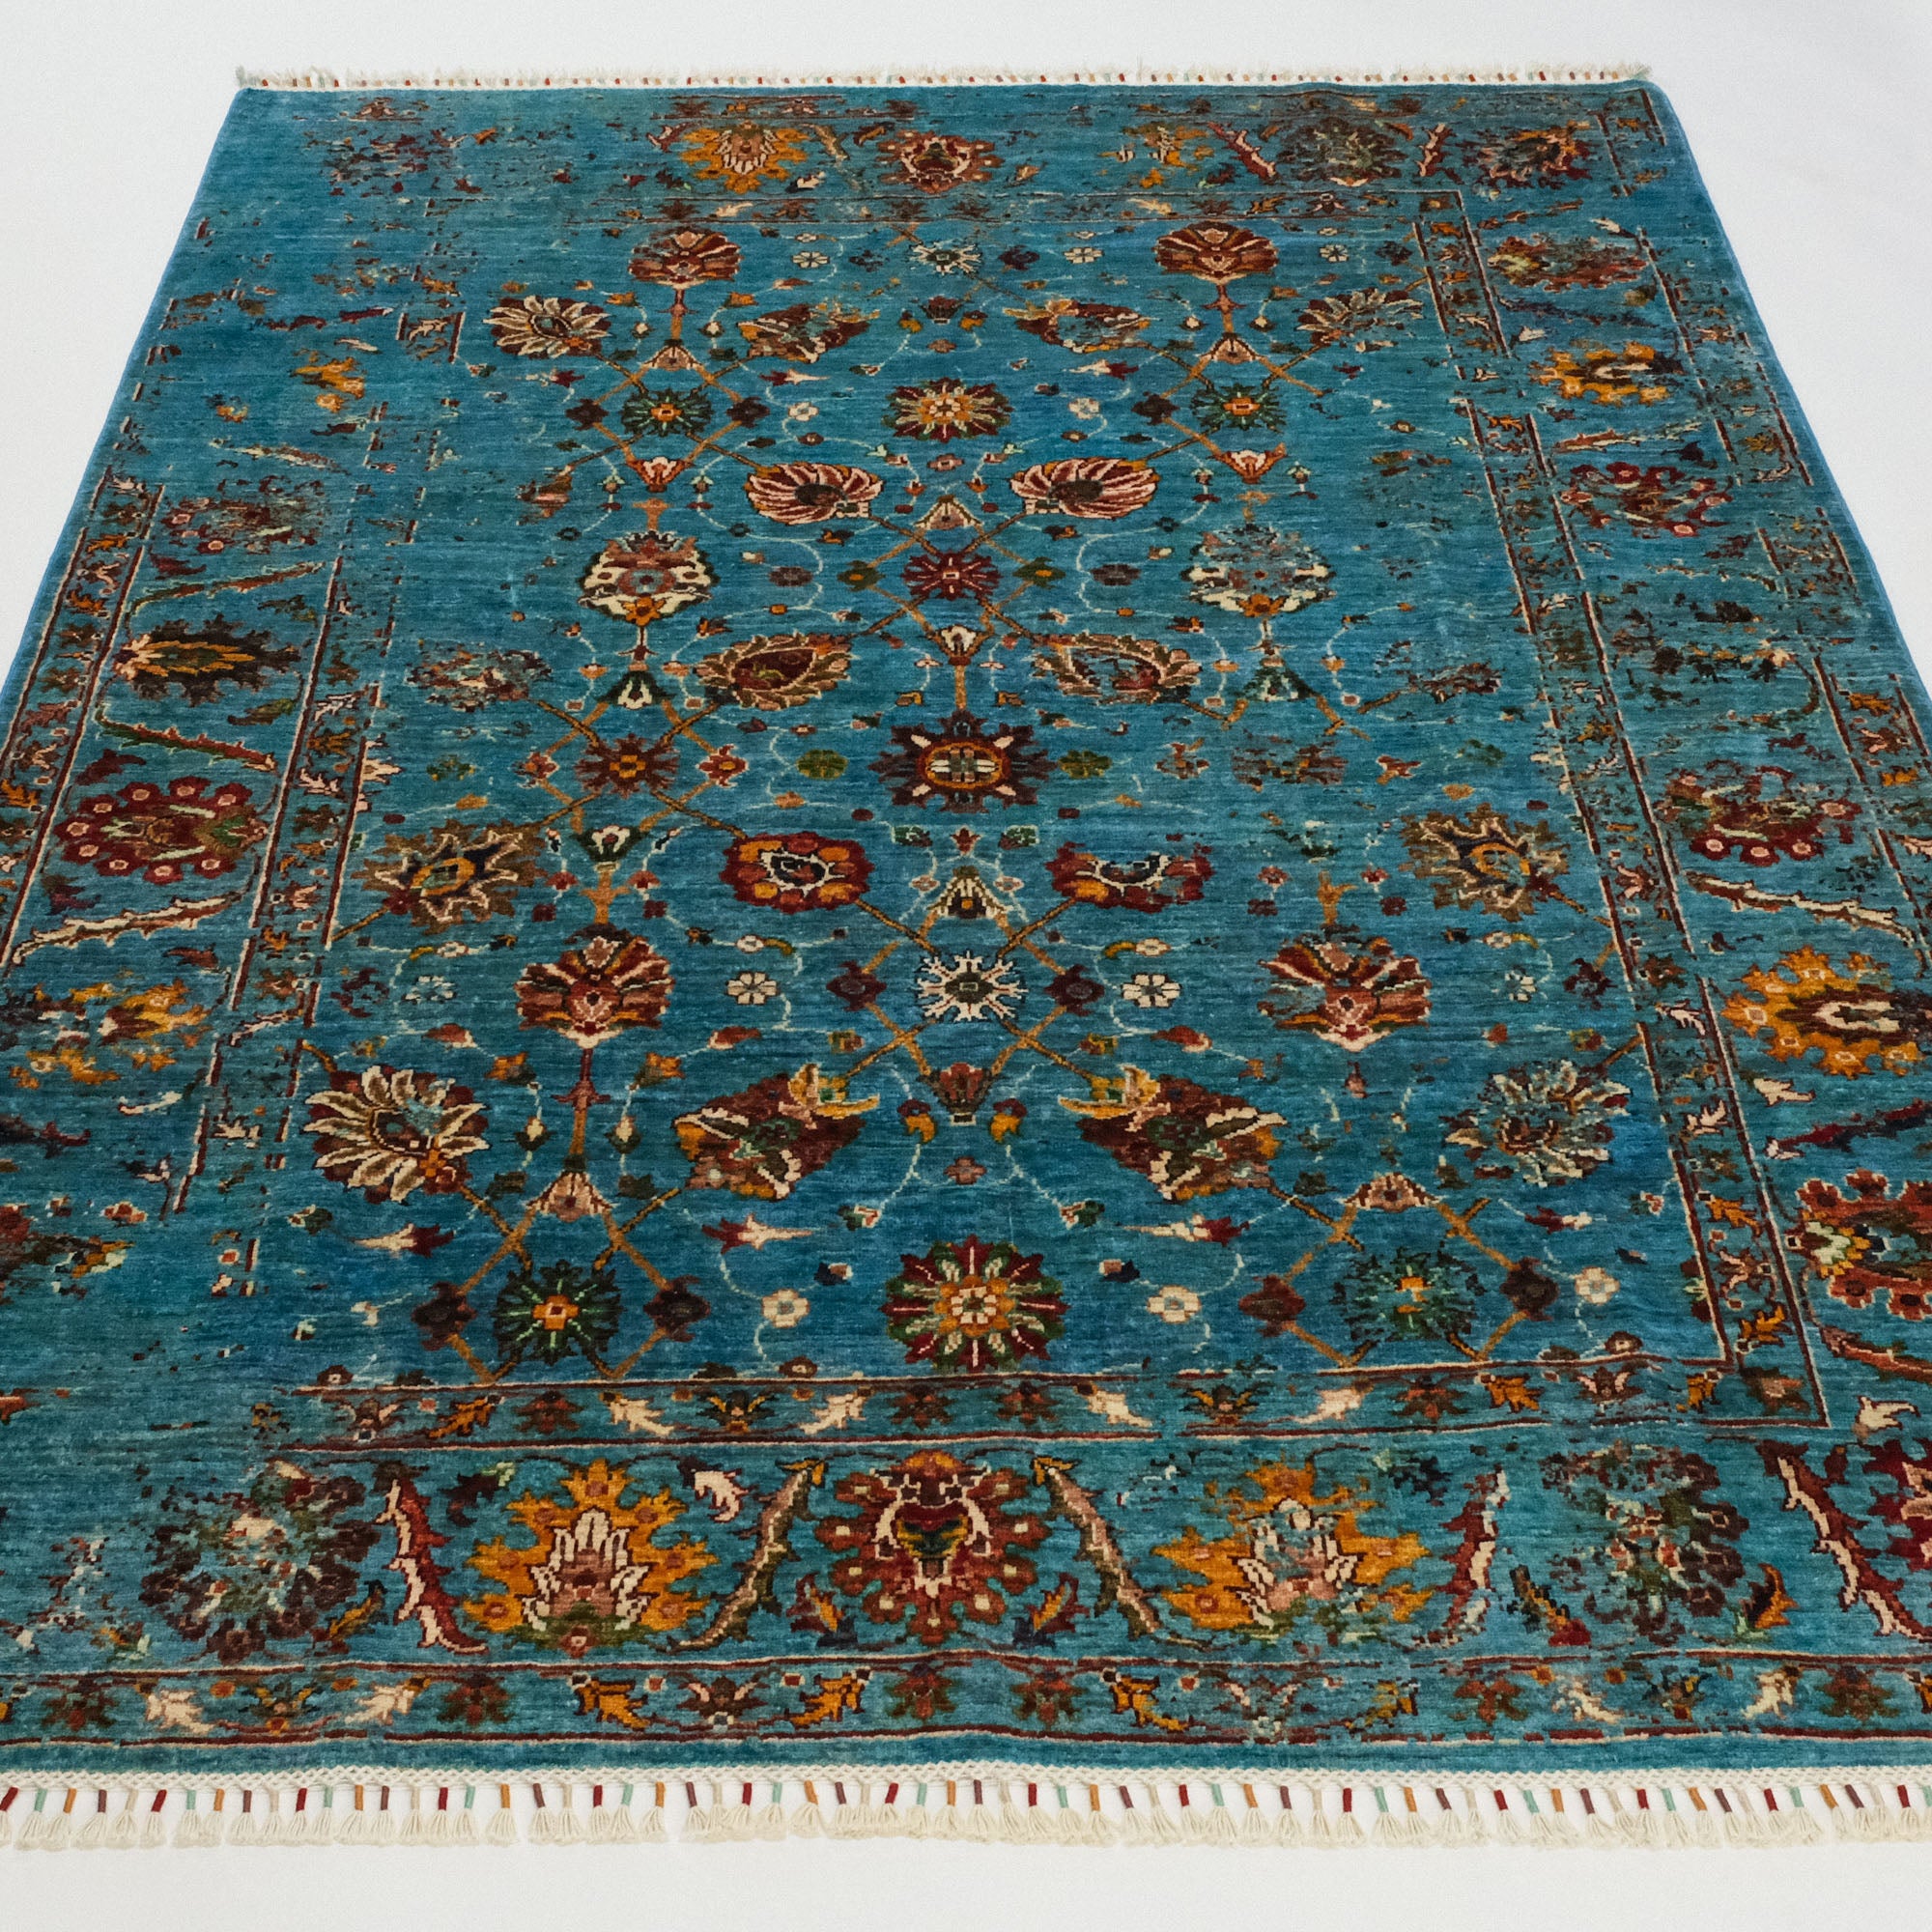 Mihman Series Hand-Woven Uşak Patterned Colorful Wool Carpet